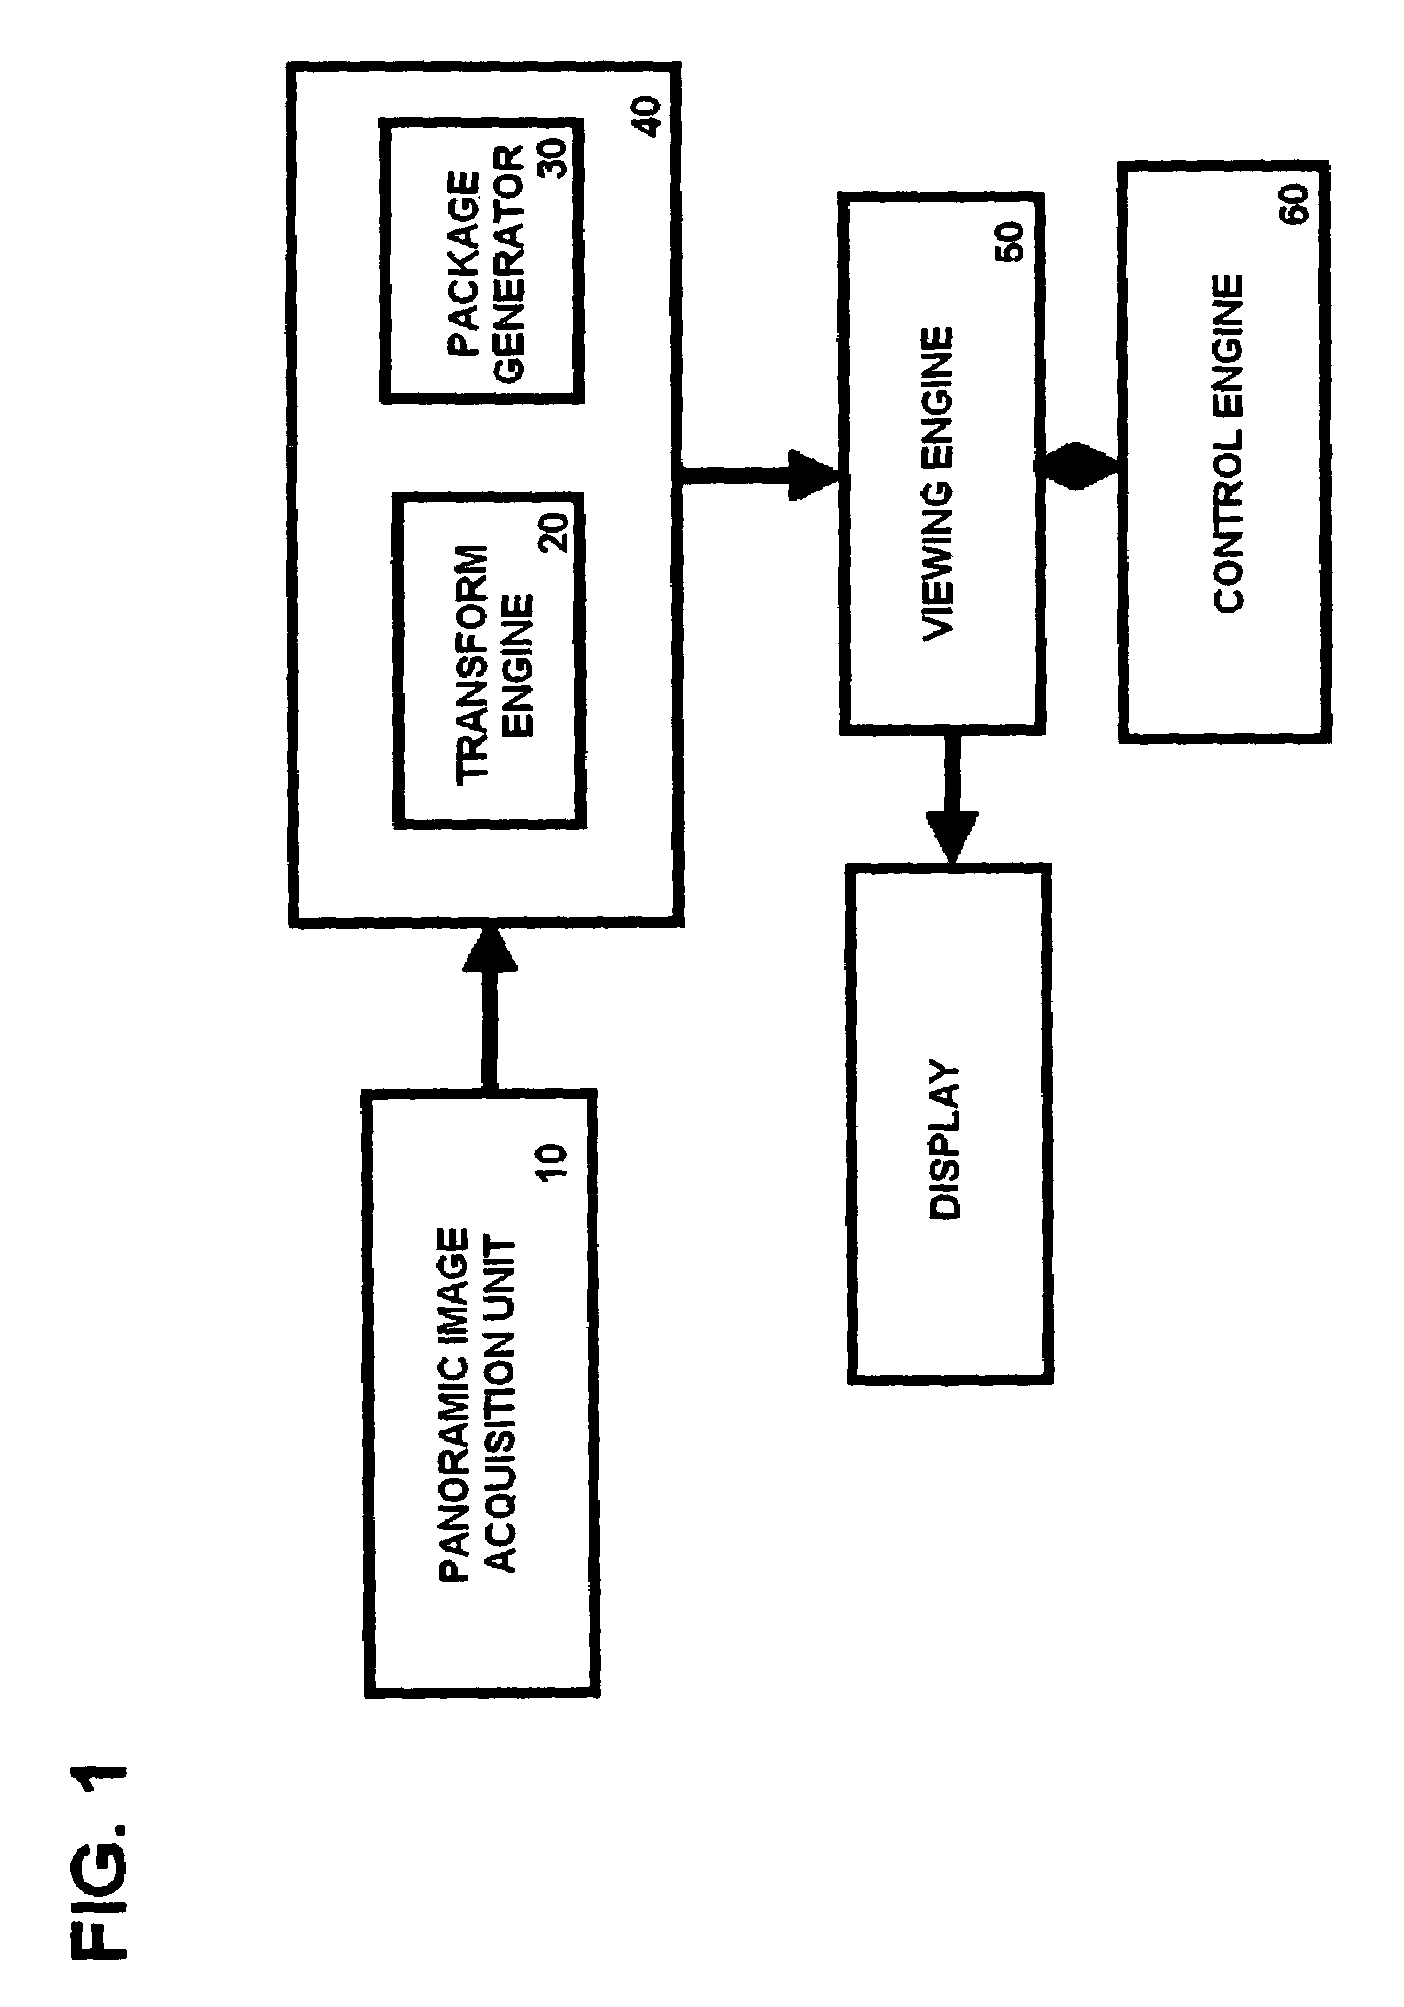 Method and apparatus for creating interactive virtual tours